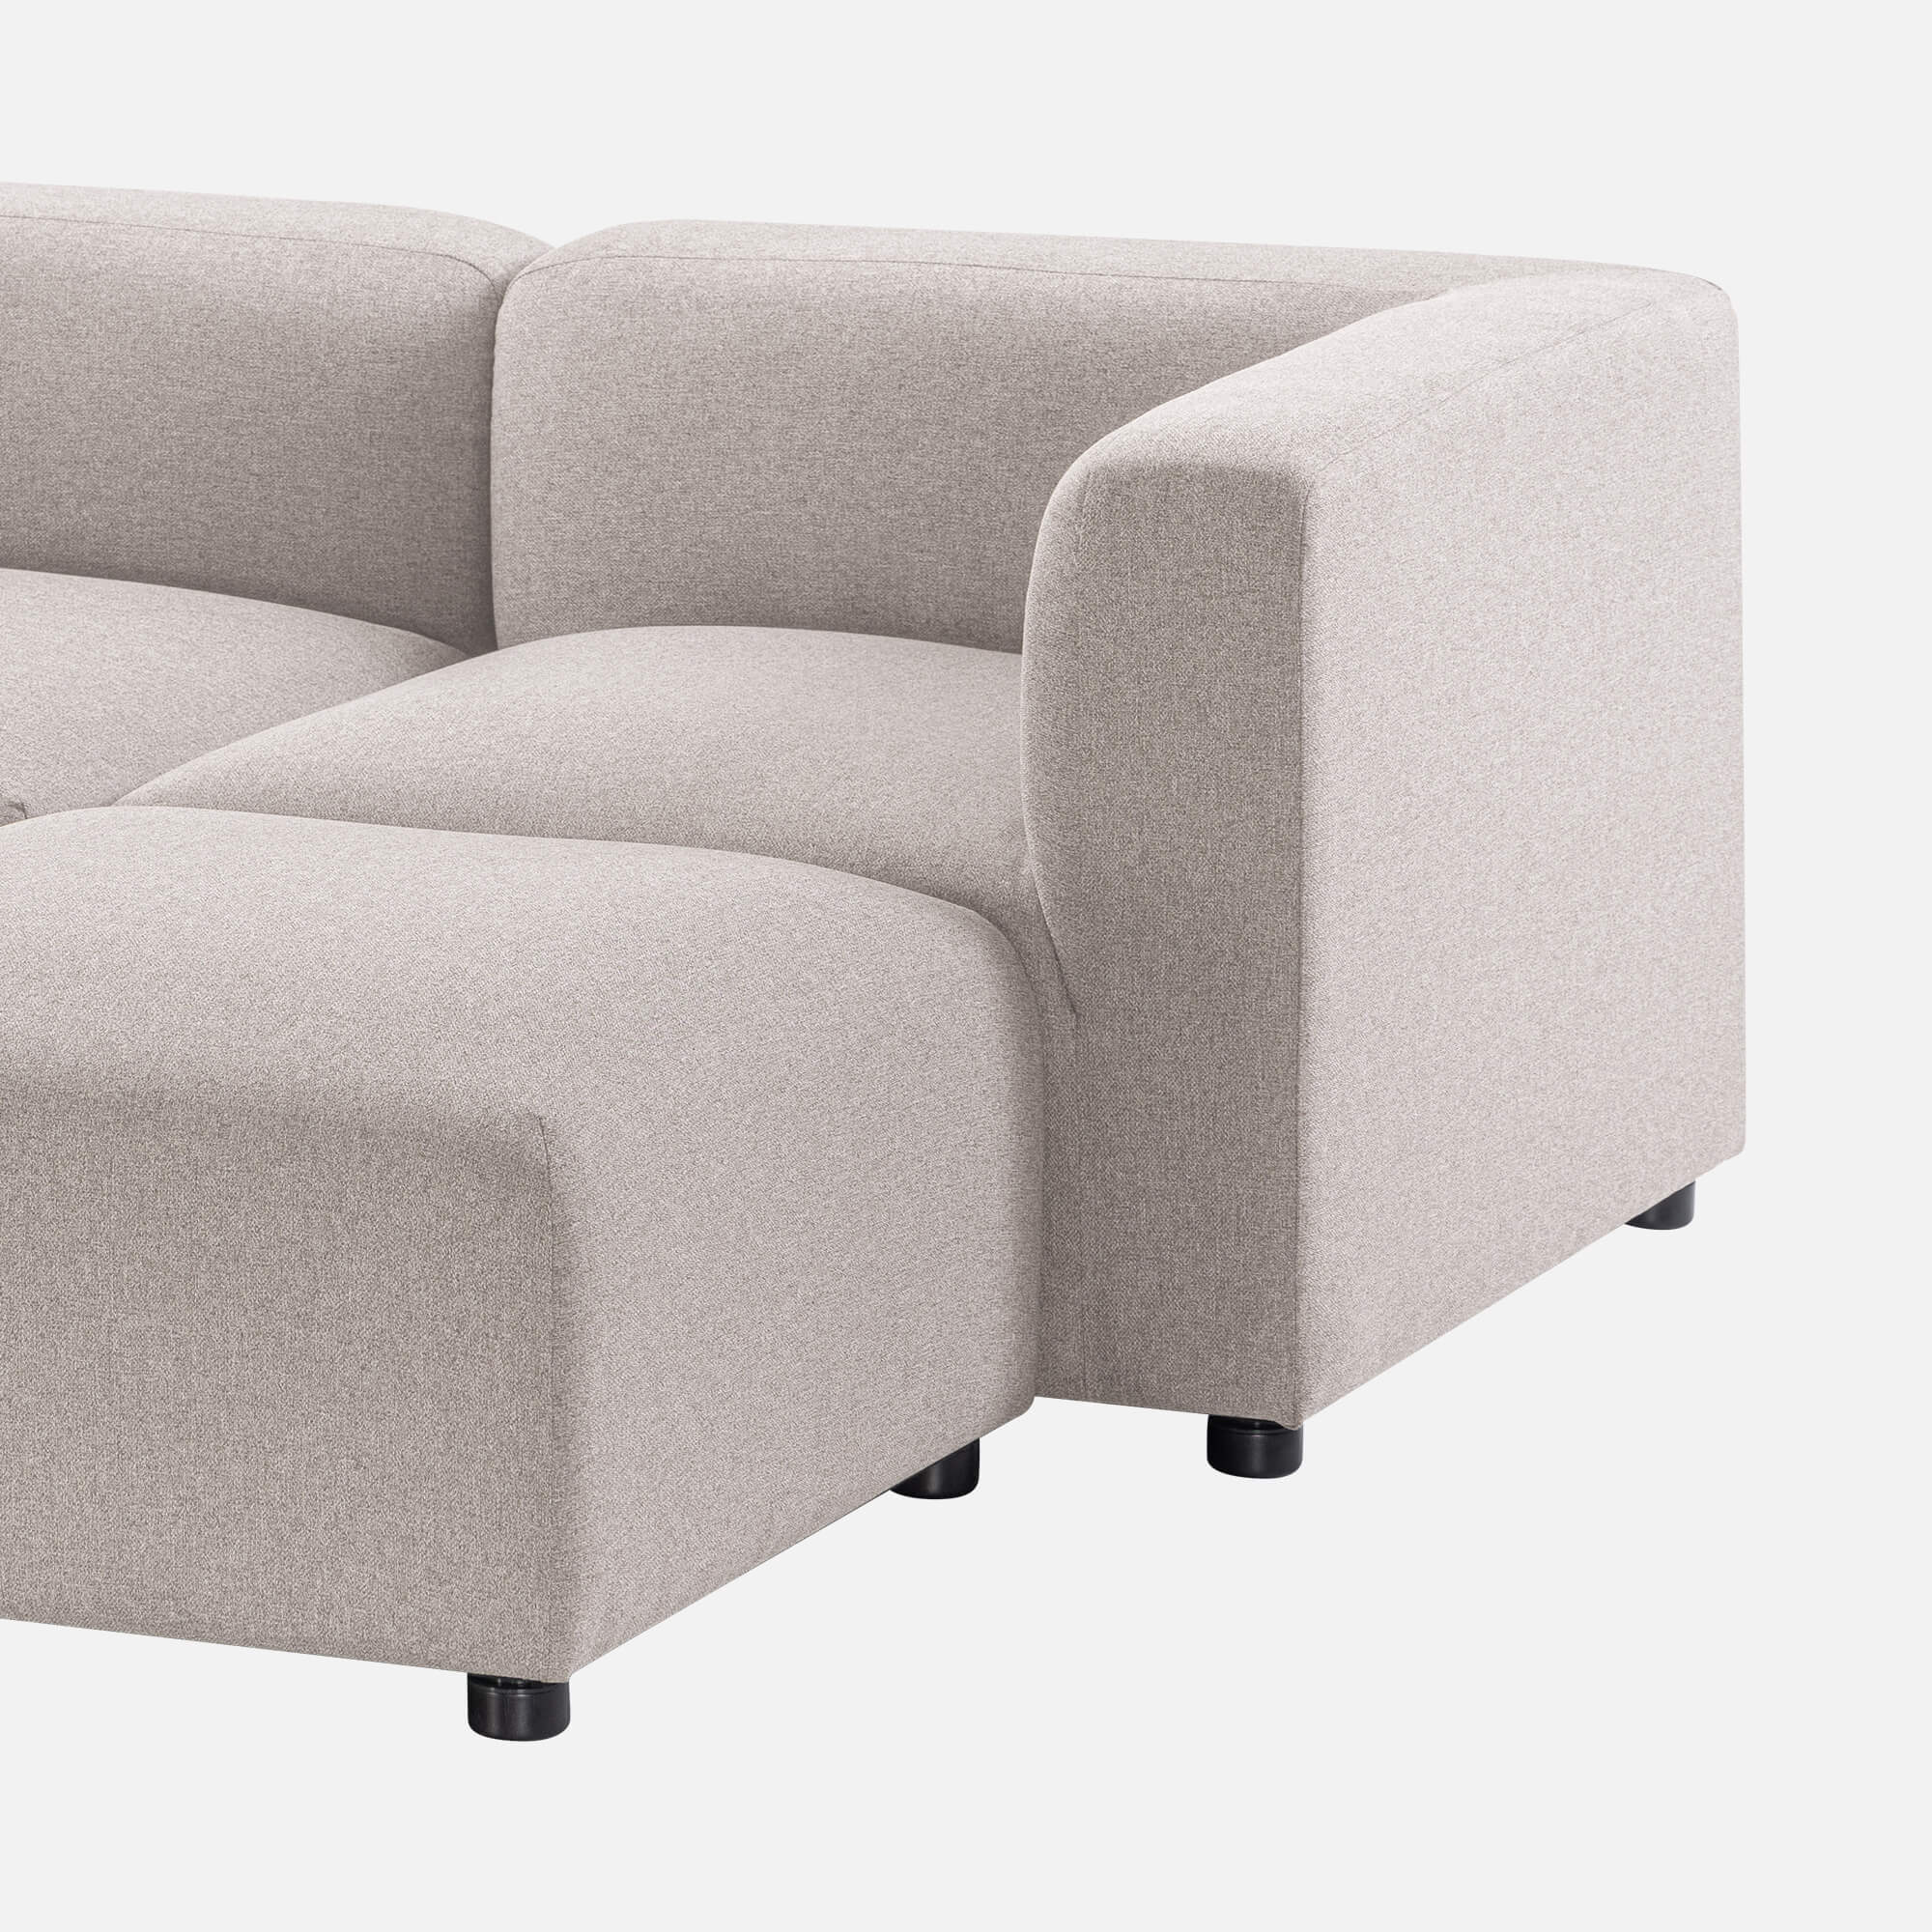 The Luca Double Chaise Sectional Sofa with an integrated footstool and ottoman in beige